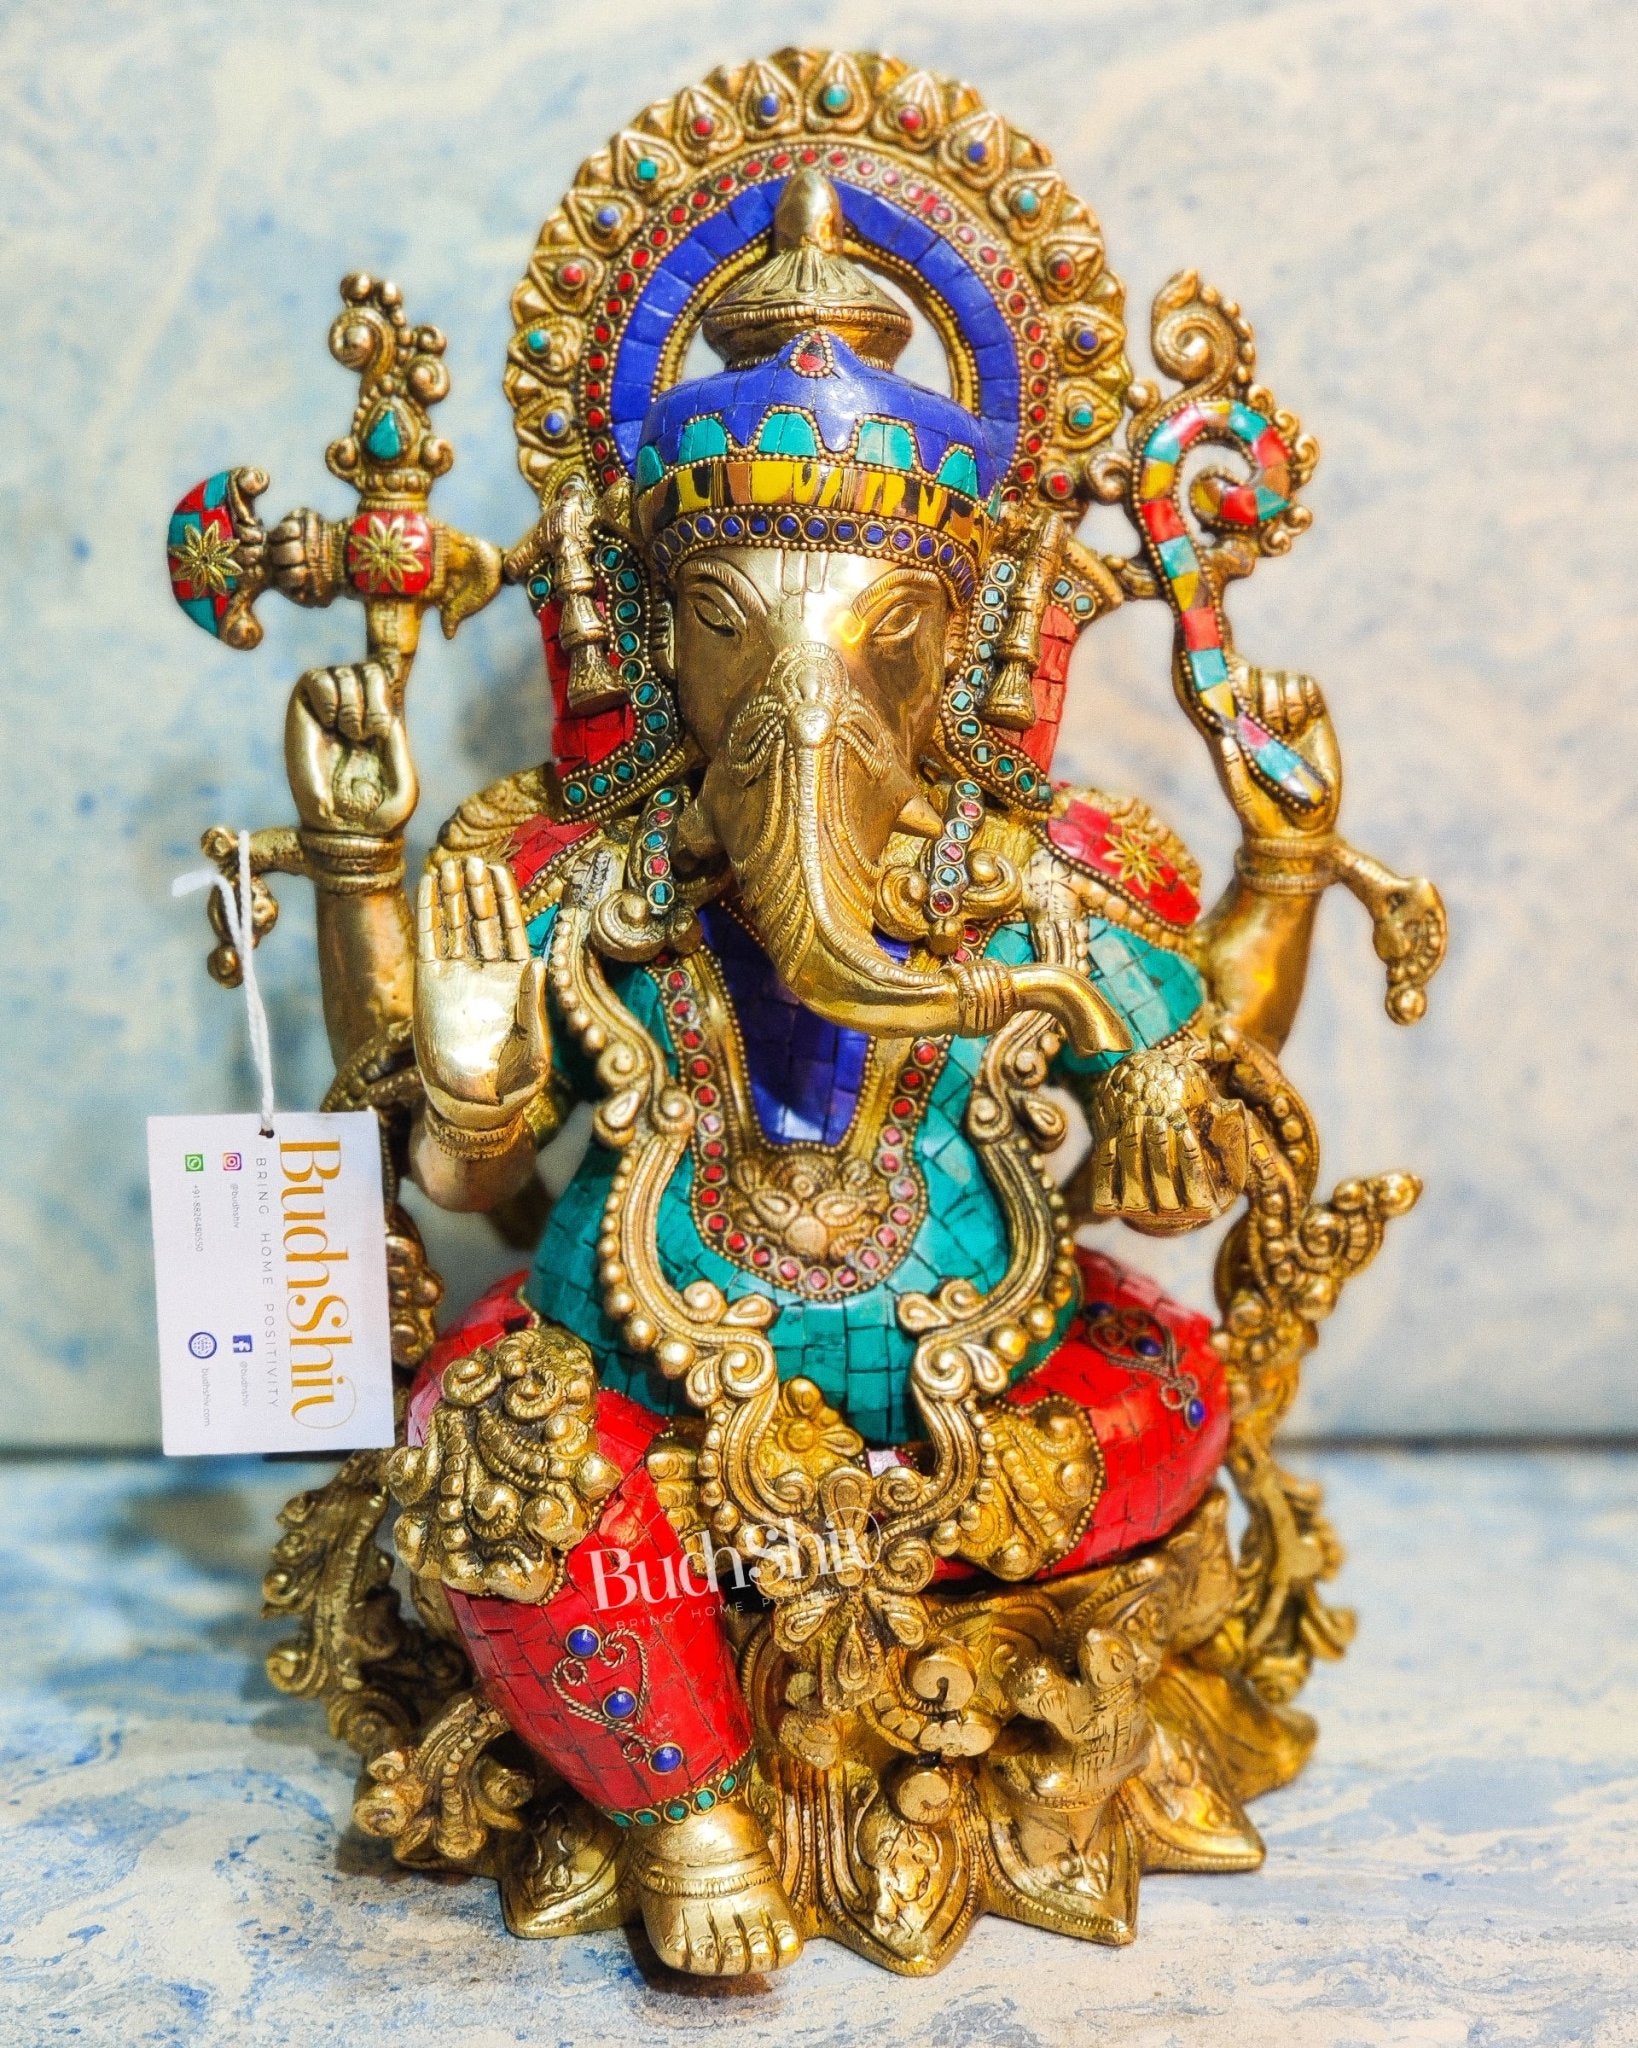 Ganesha Brass Idol Ganapati Brass Idol with a unique trunk and four hands Ganesha brass statue with stonework 16 inches - Budhshiv.com